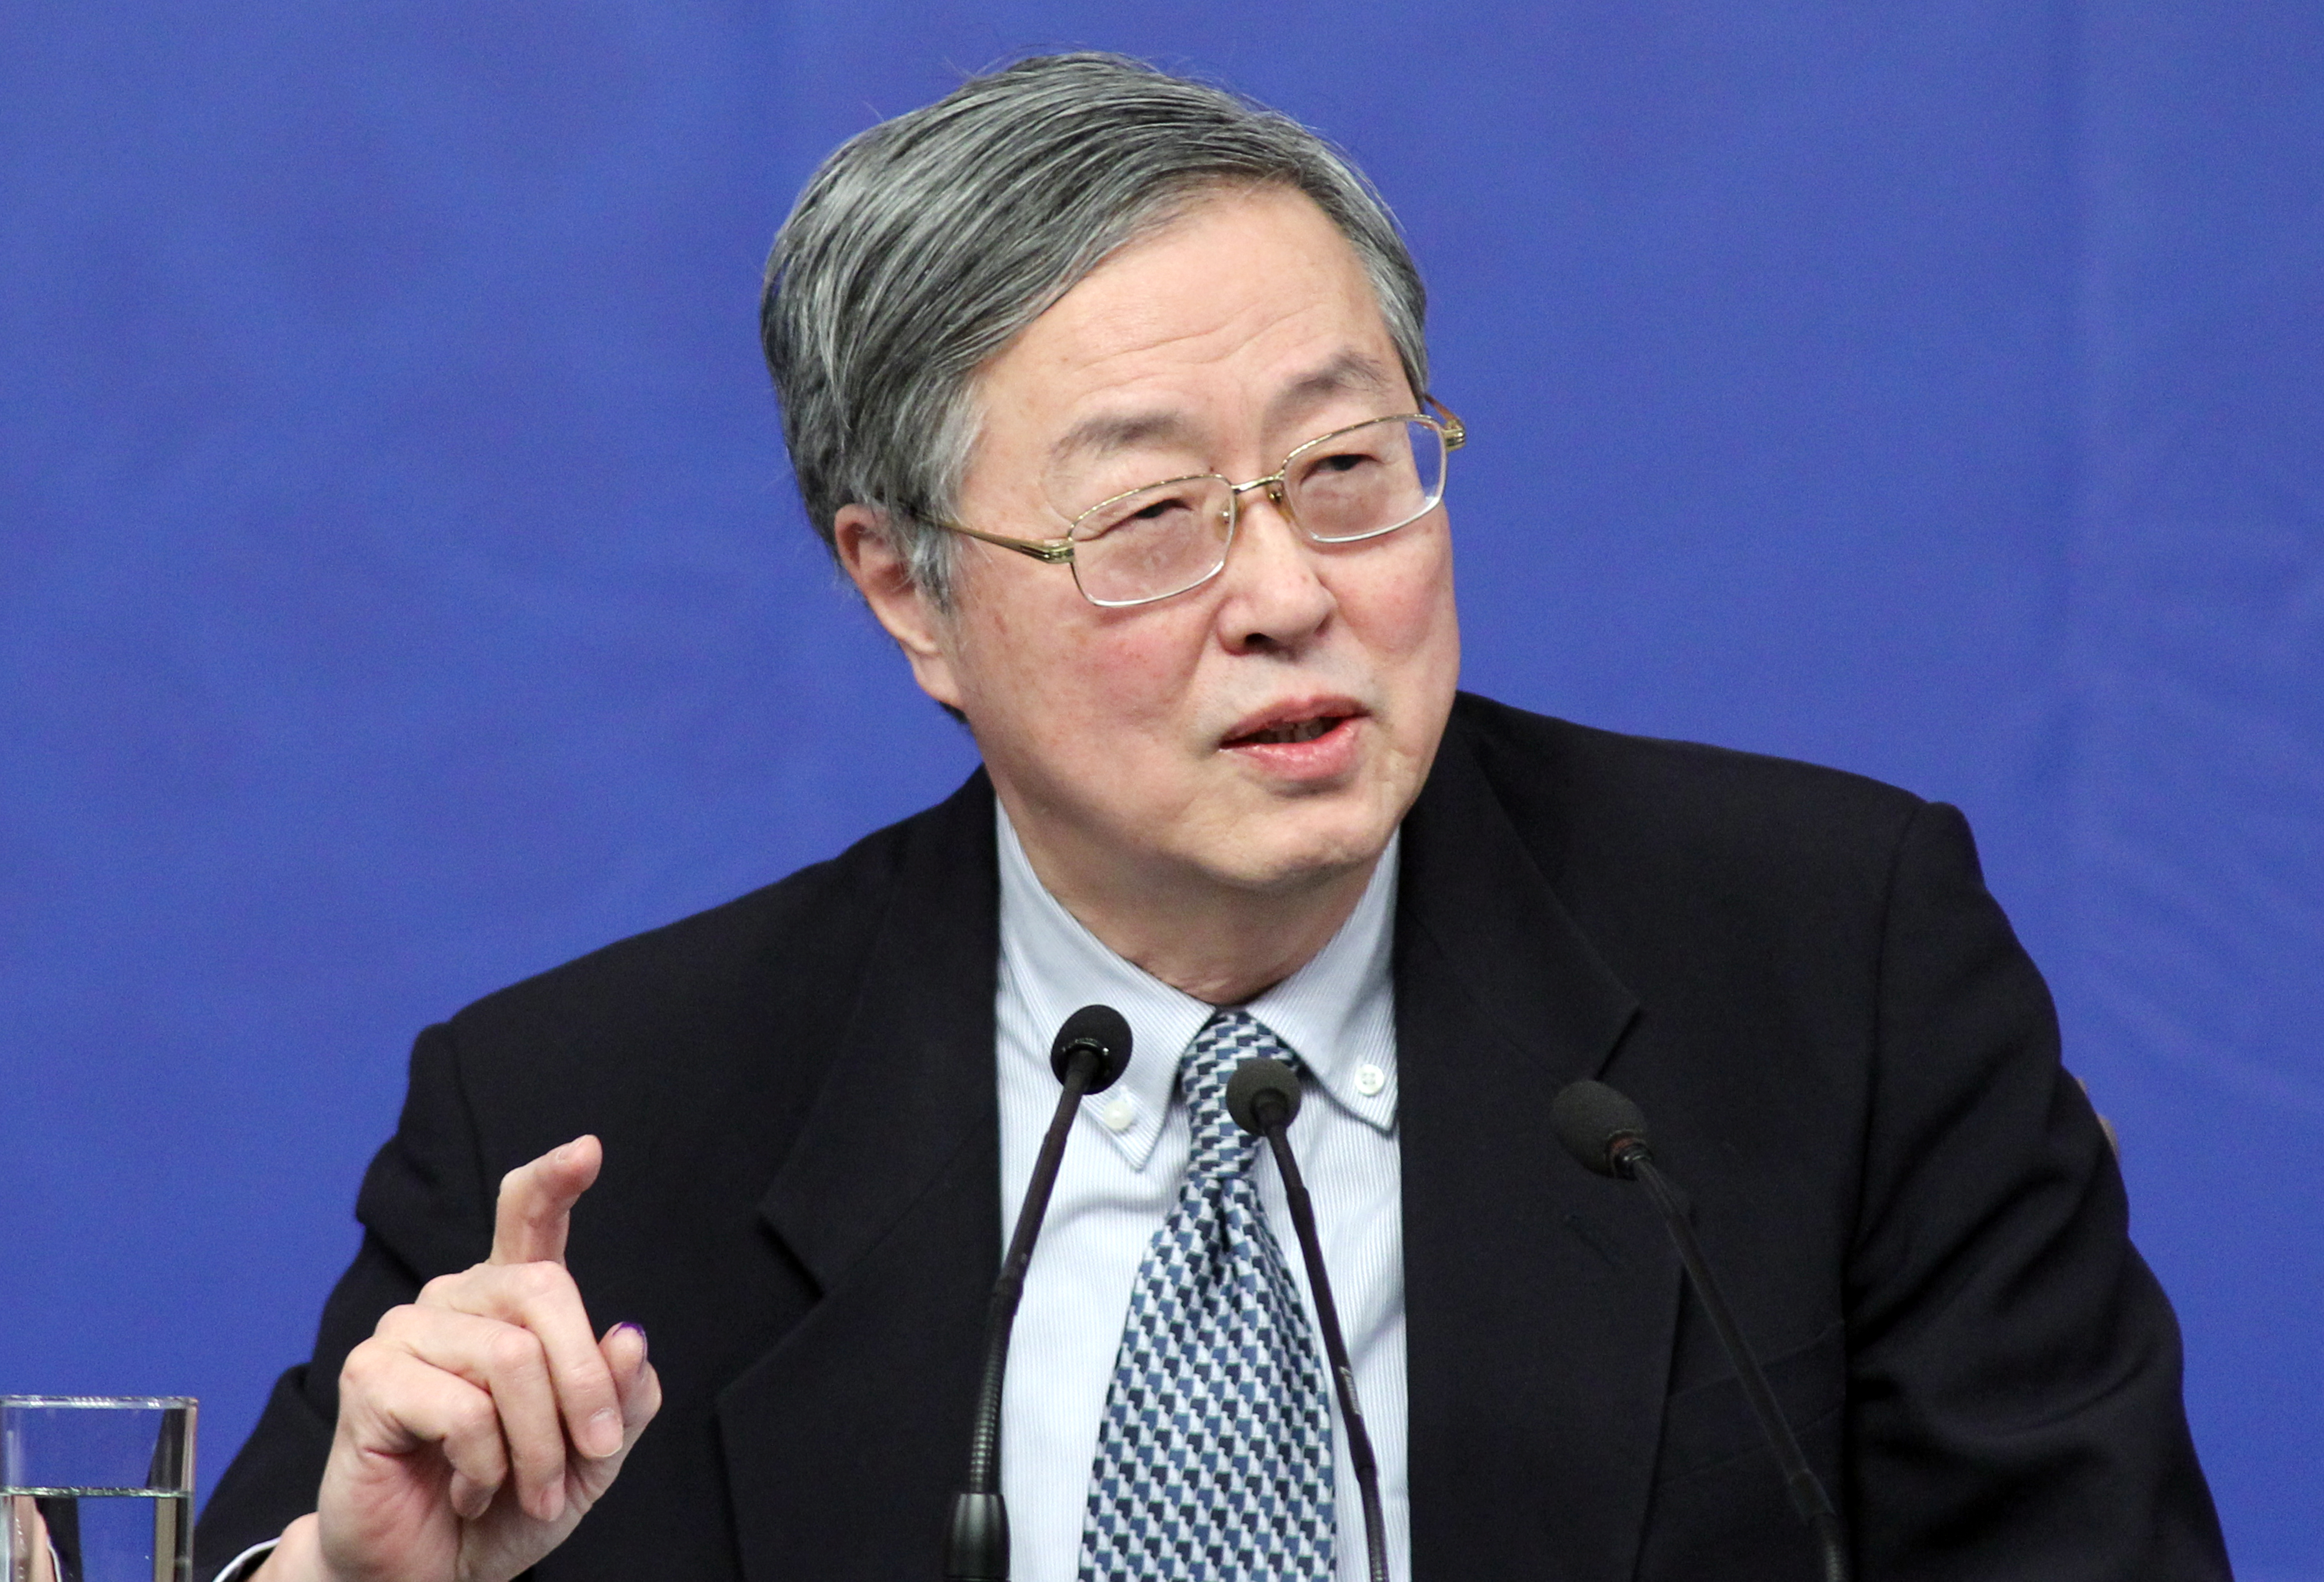 PBOC governor Zhou Xiaochuan recently said China's capital account could basically become open by the end of 2015. Photo: Simon Song